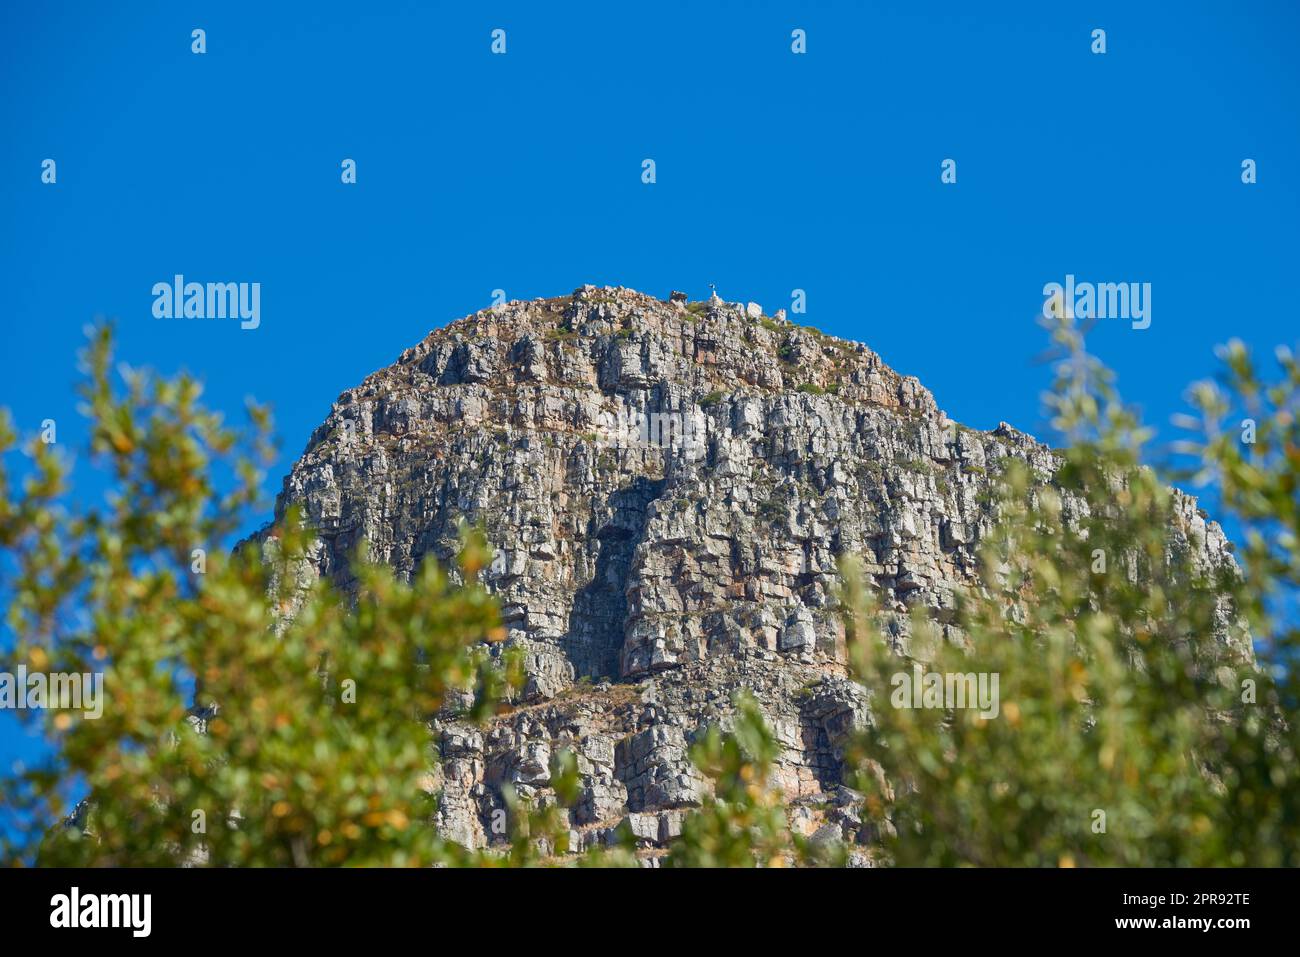 Landscape view of mountain, copy space and blue sky background from lush, green botanical garden or national park. Low angle of rough, rocky or dangerous terrain in remote location overseas or abroad Stock Photo